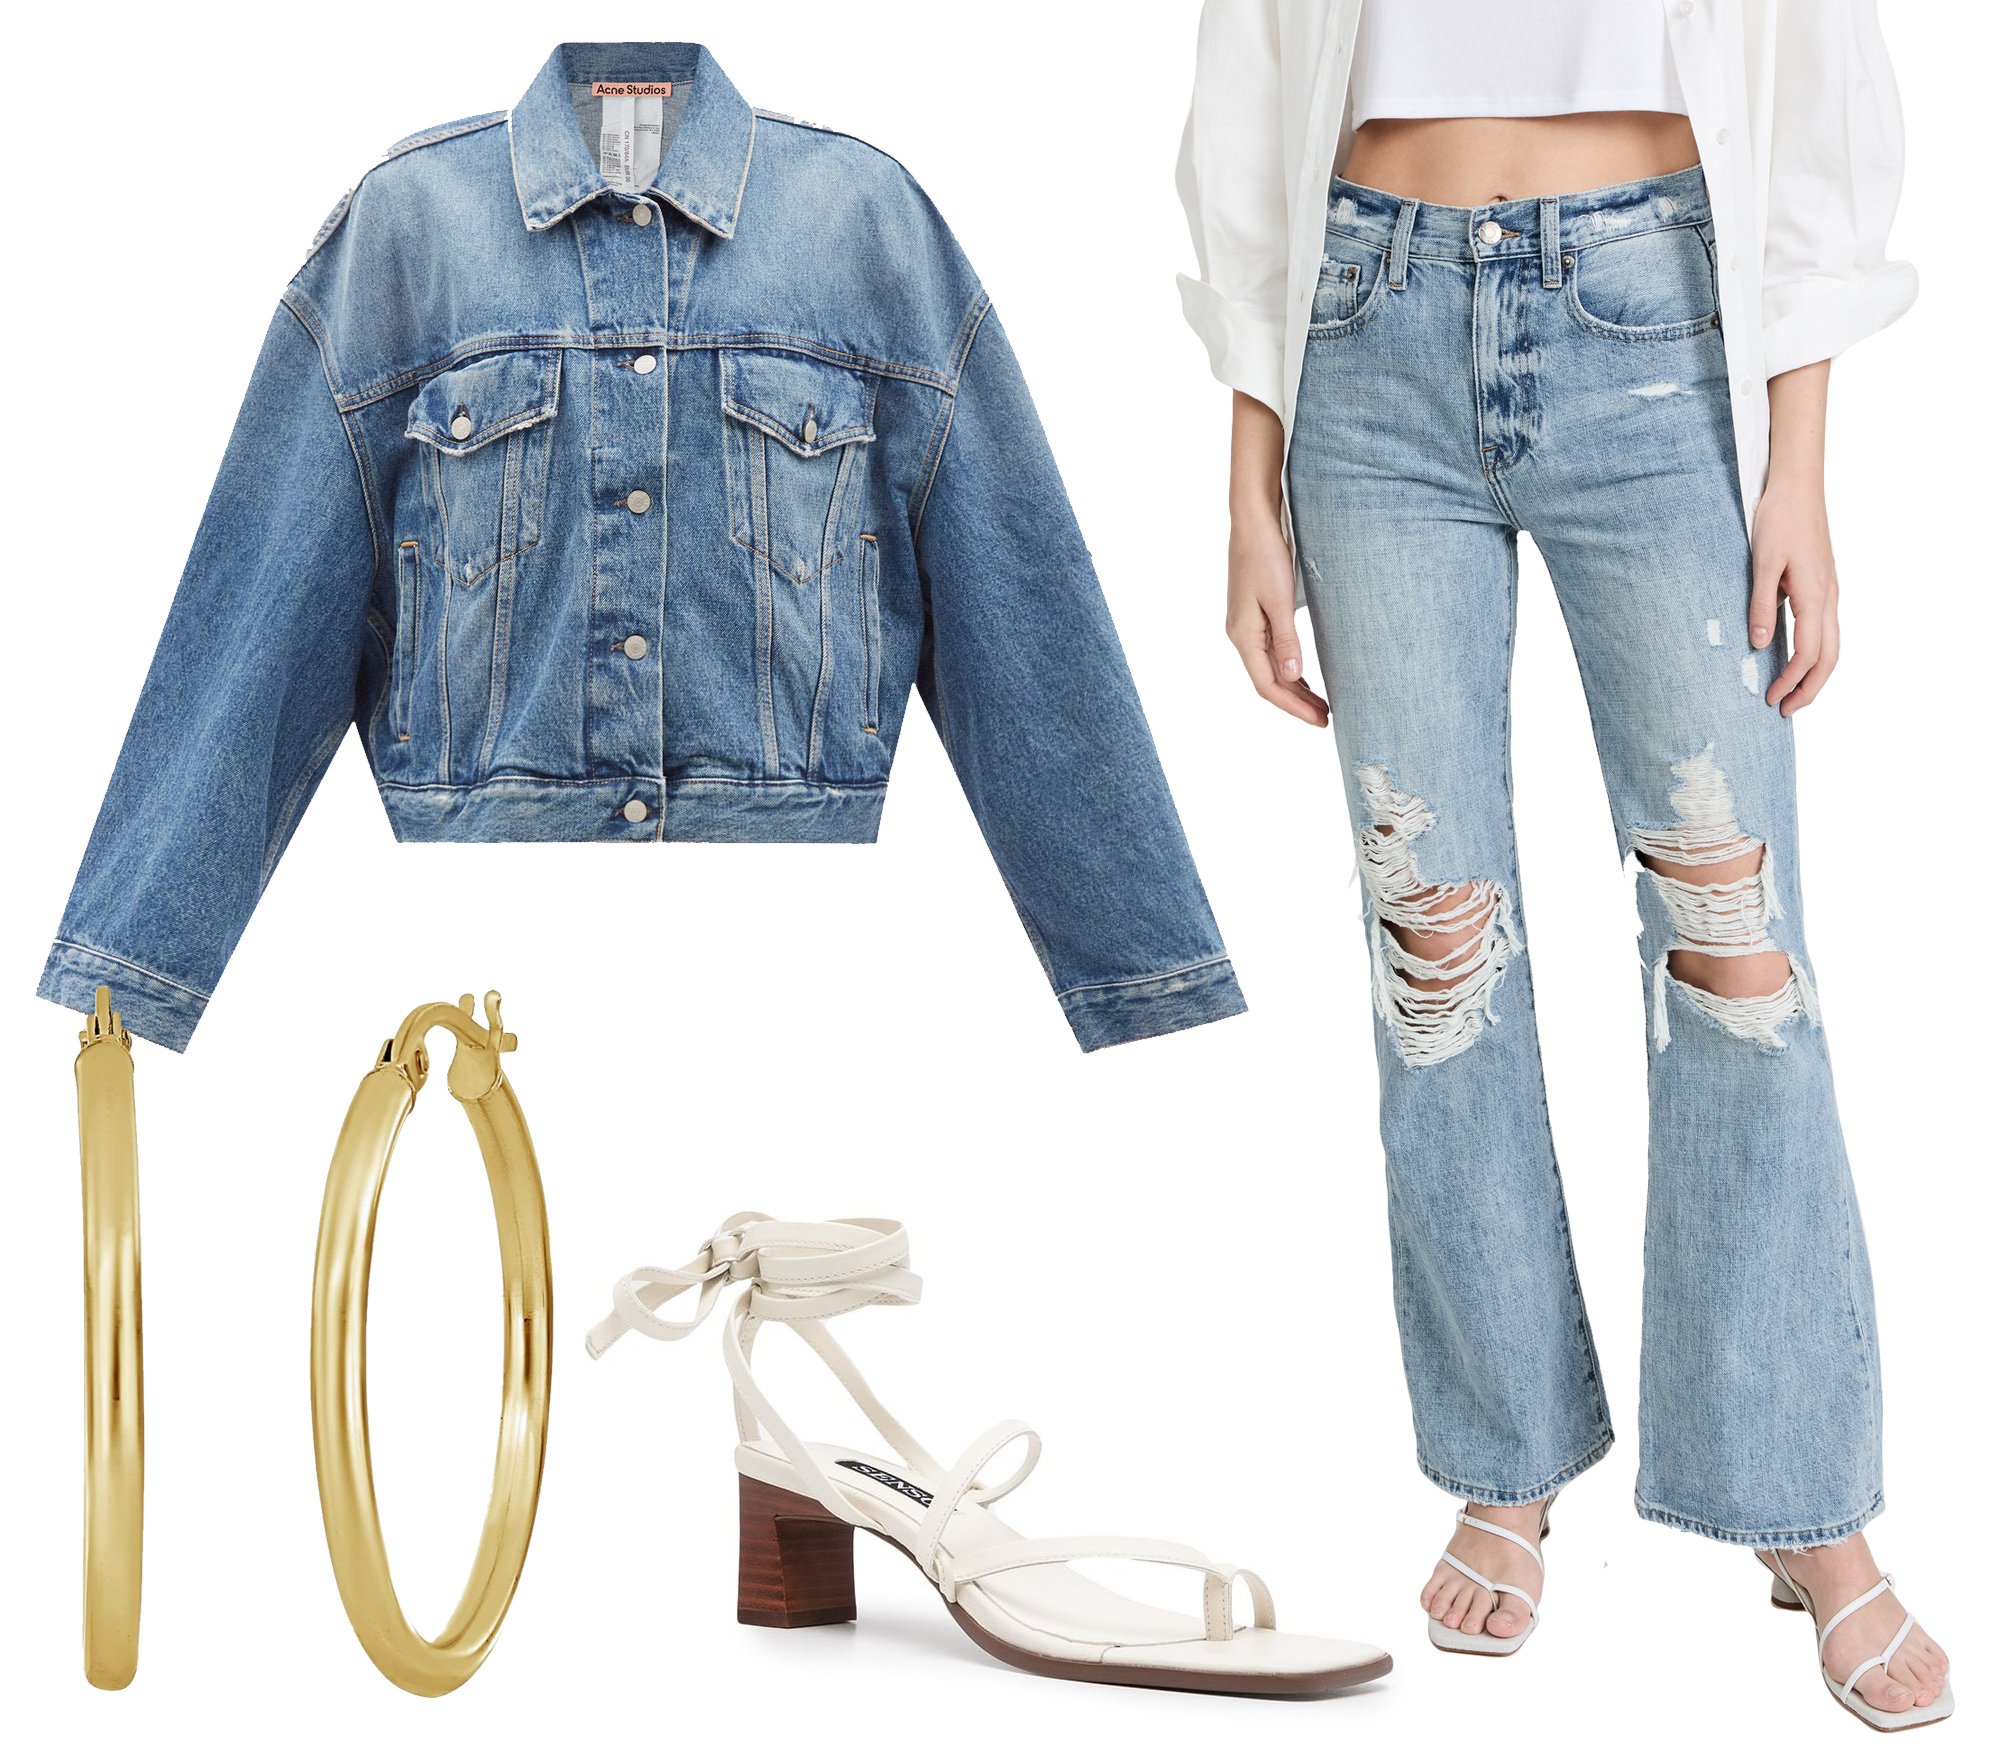 Elevated Elegance: This ensemble featuring Acne Studios' Morris Oversized Cropped Denim Jacket and Pistola Denim's Stevie High Rise Flare Jeans, accessorized with Bony Levy gold hoop earrings and Senso's Raegan lace-up sandals, embodies the upscale potential of denim-on-denim fashion